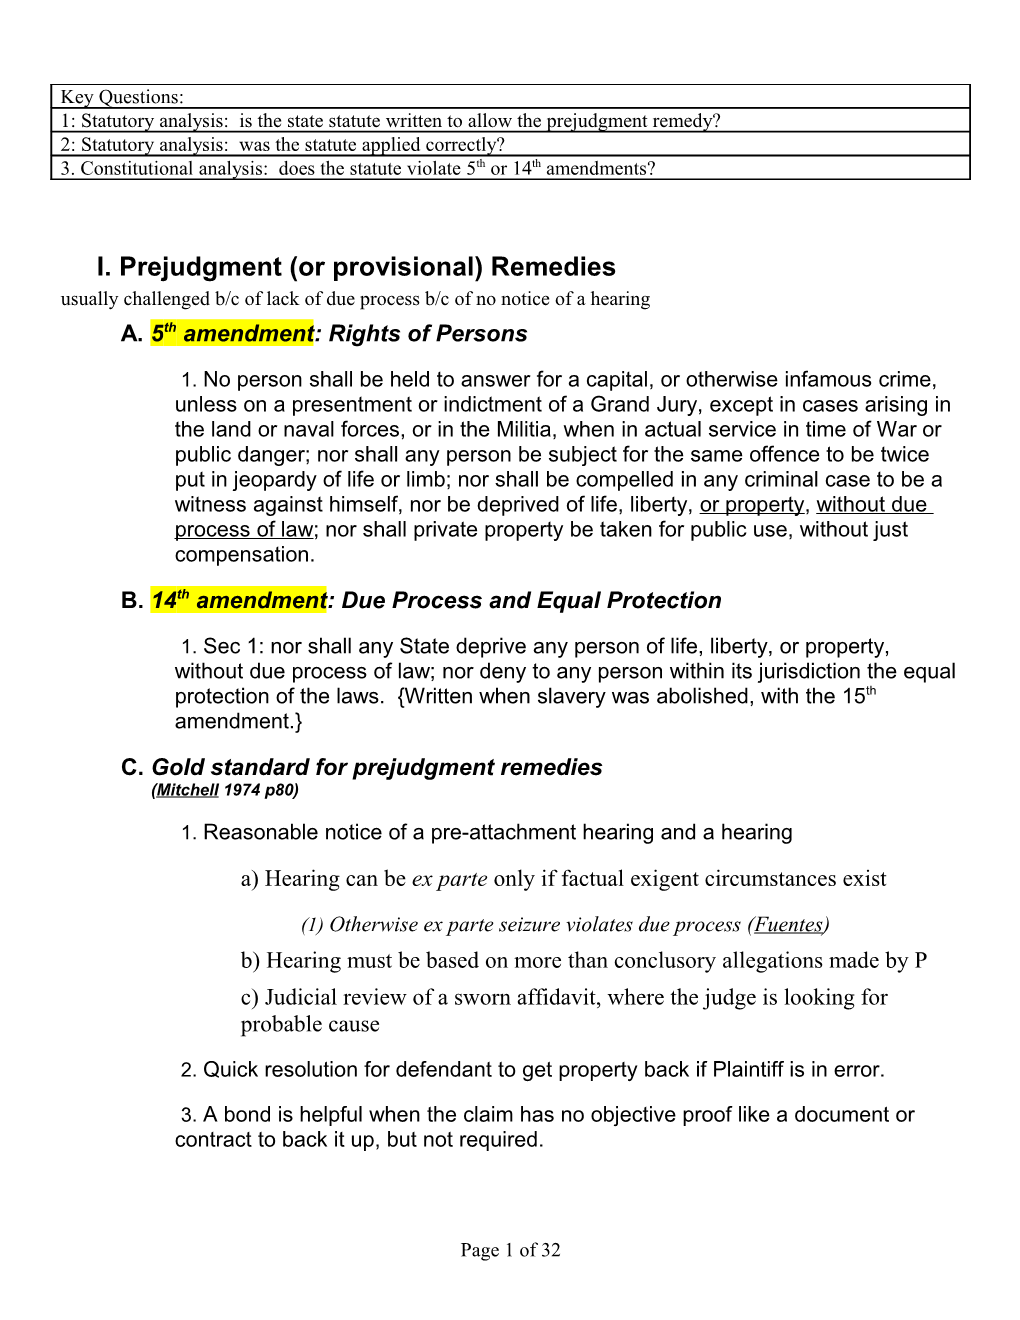 I. Prejudgment (Or Provisional) Remedies